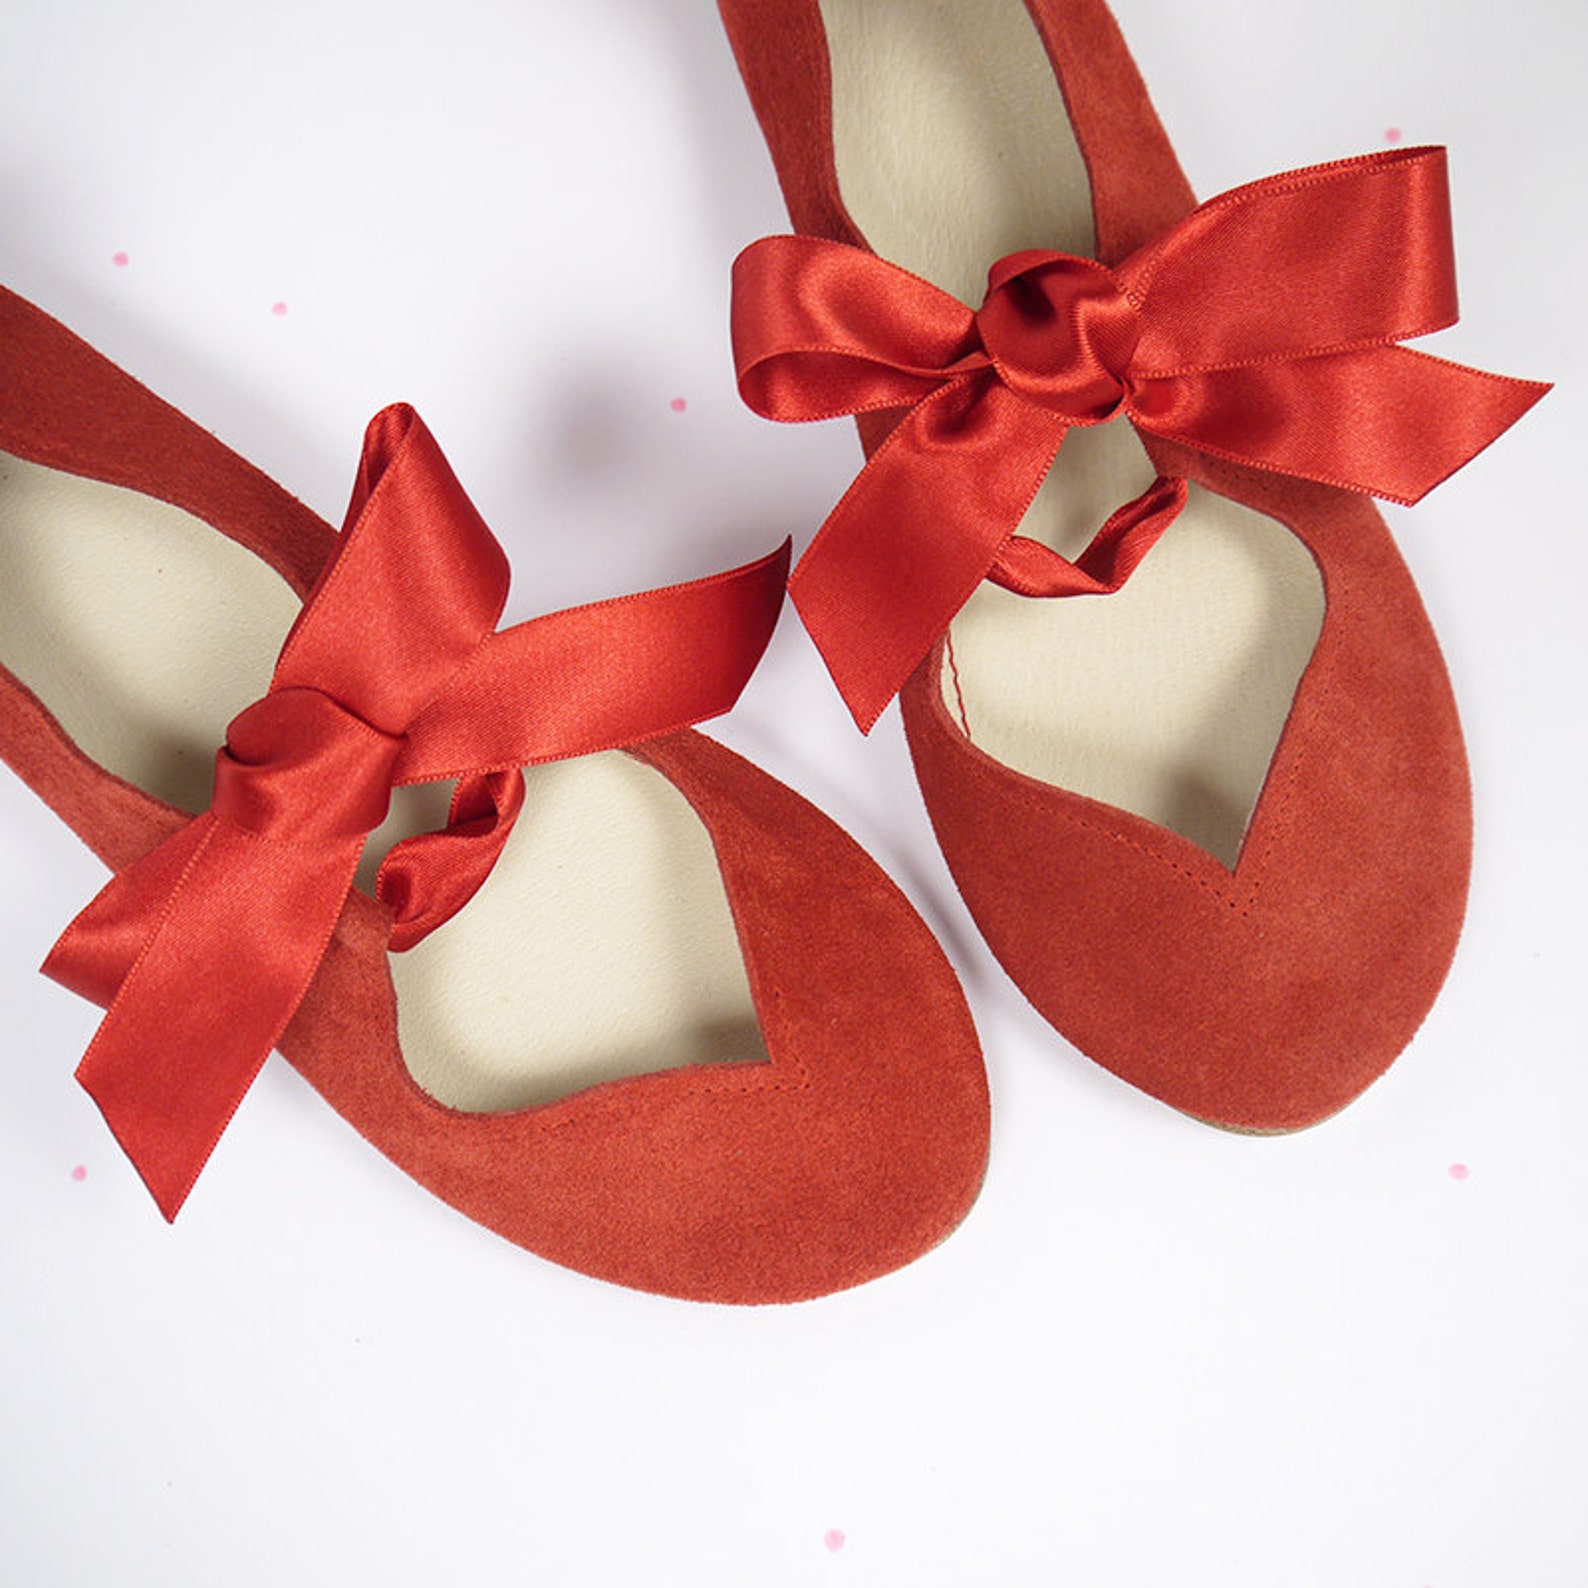 red ballet shoes. ballet flats with ribbon. ballet flats. mary jane shoes. red women shoes. wedding shoes. flat wedding shoes. r